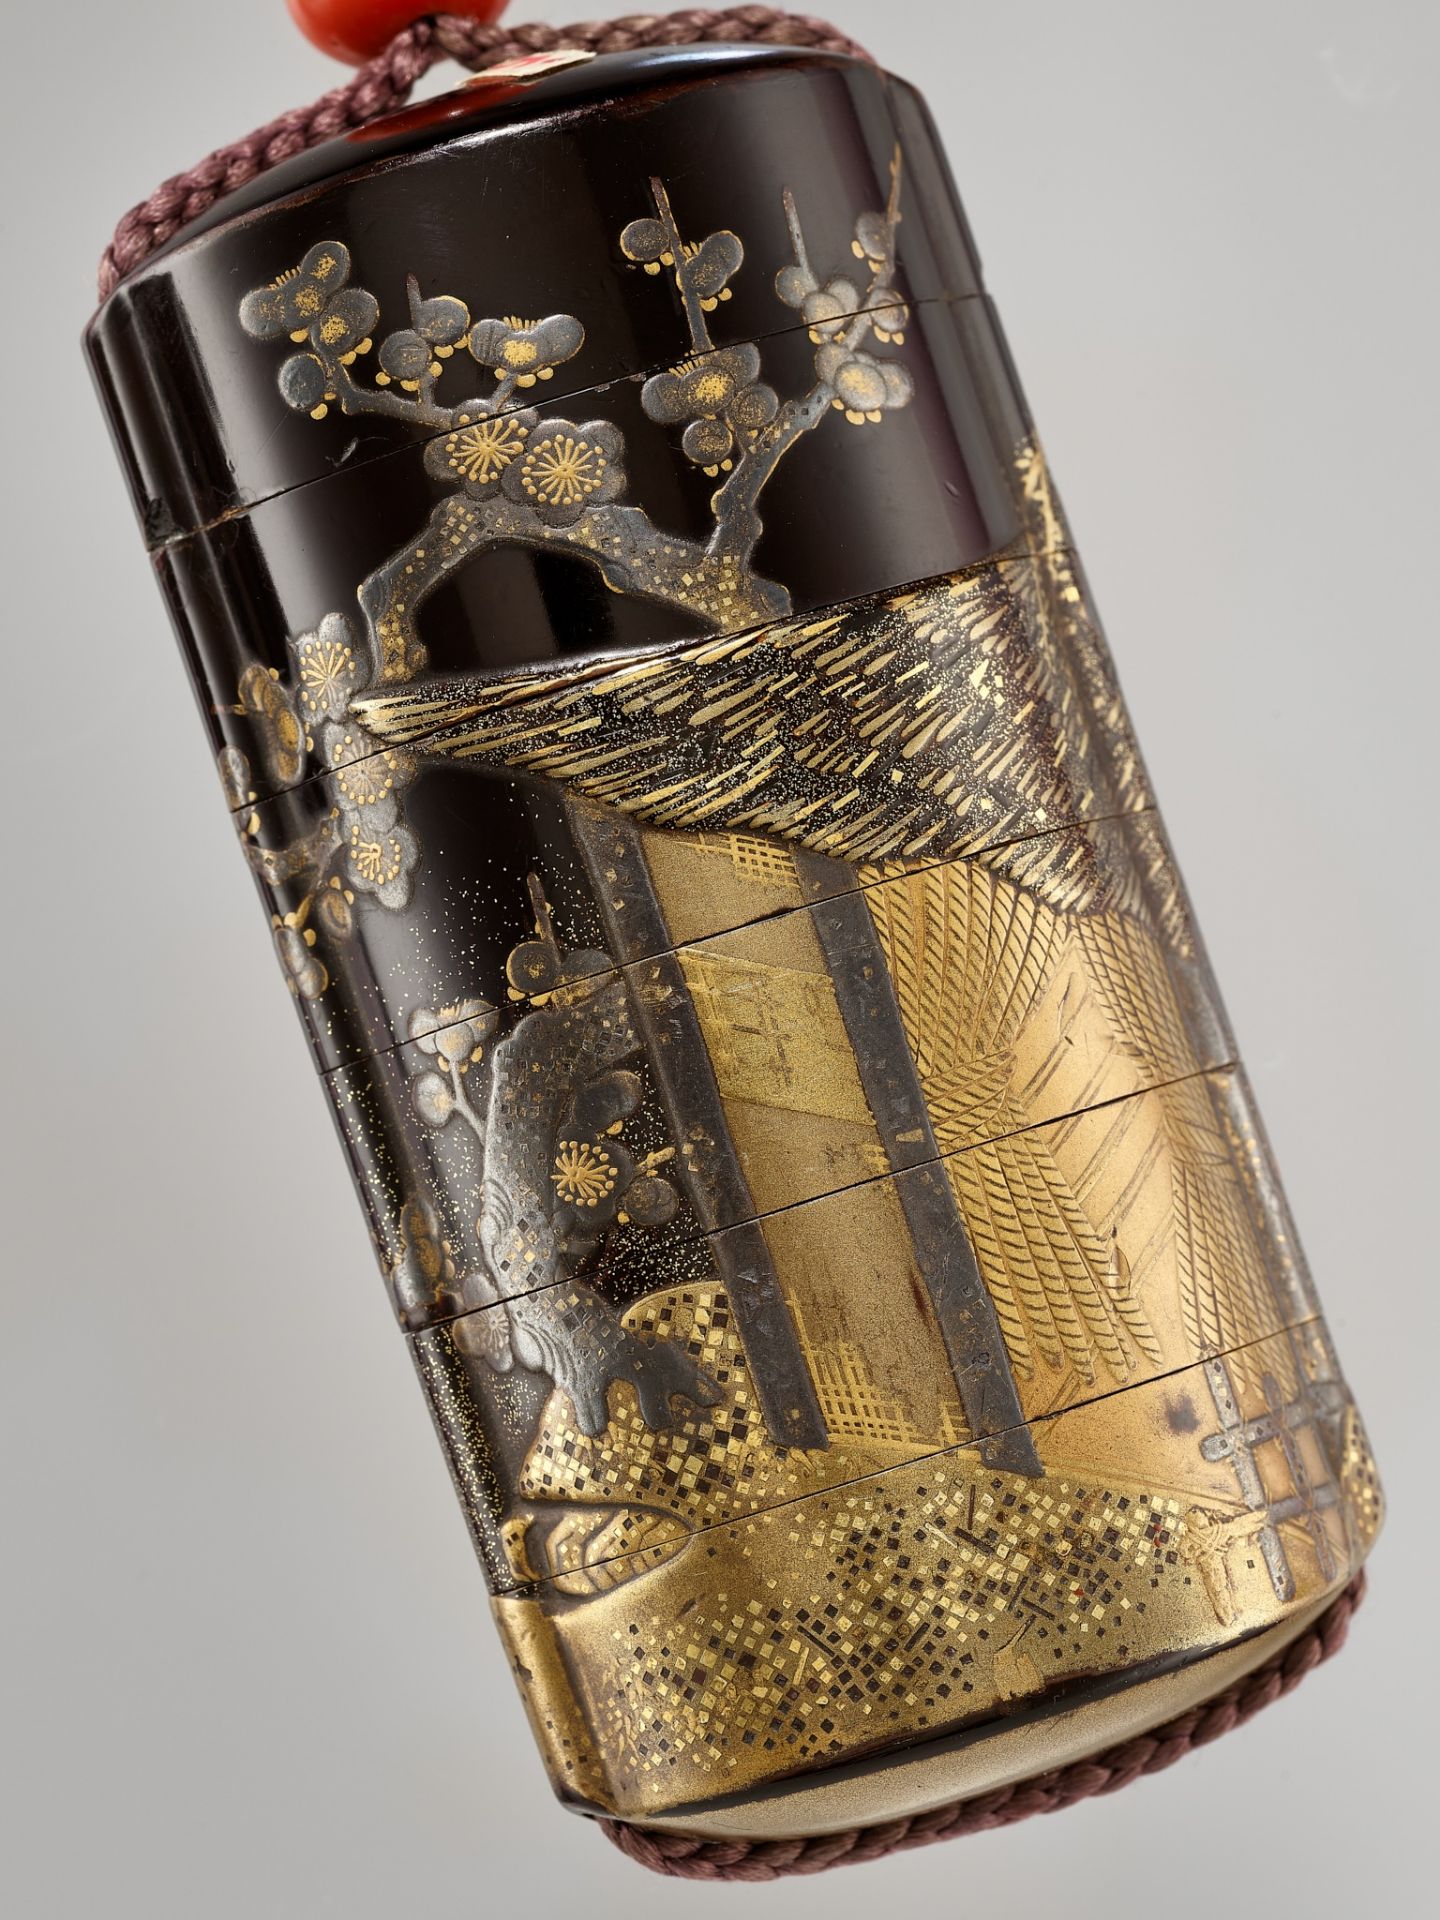 A FIVE-CASE LACQUER INRO DEPICTING A CHARMING WINTER SCENE - Image 3 of 8